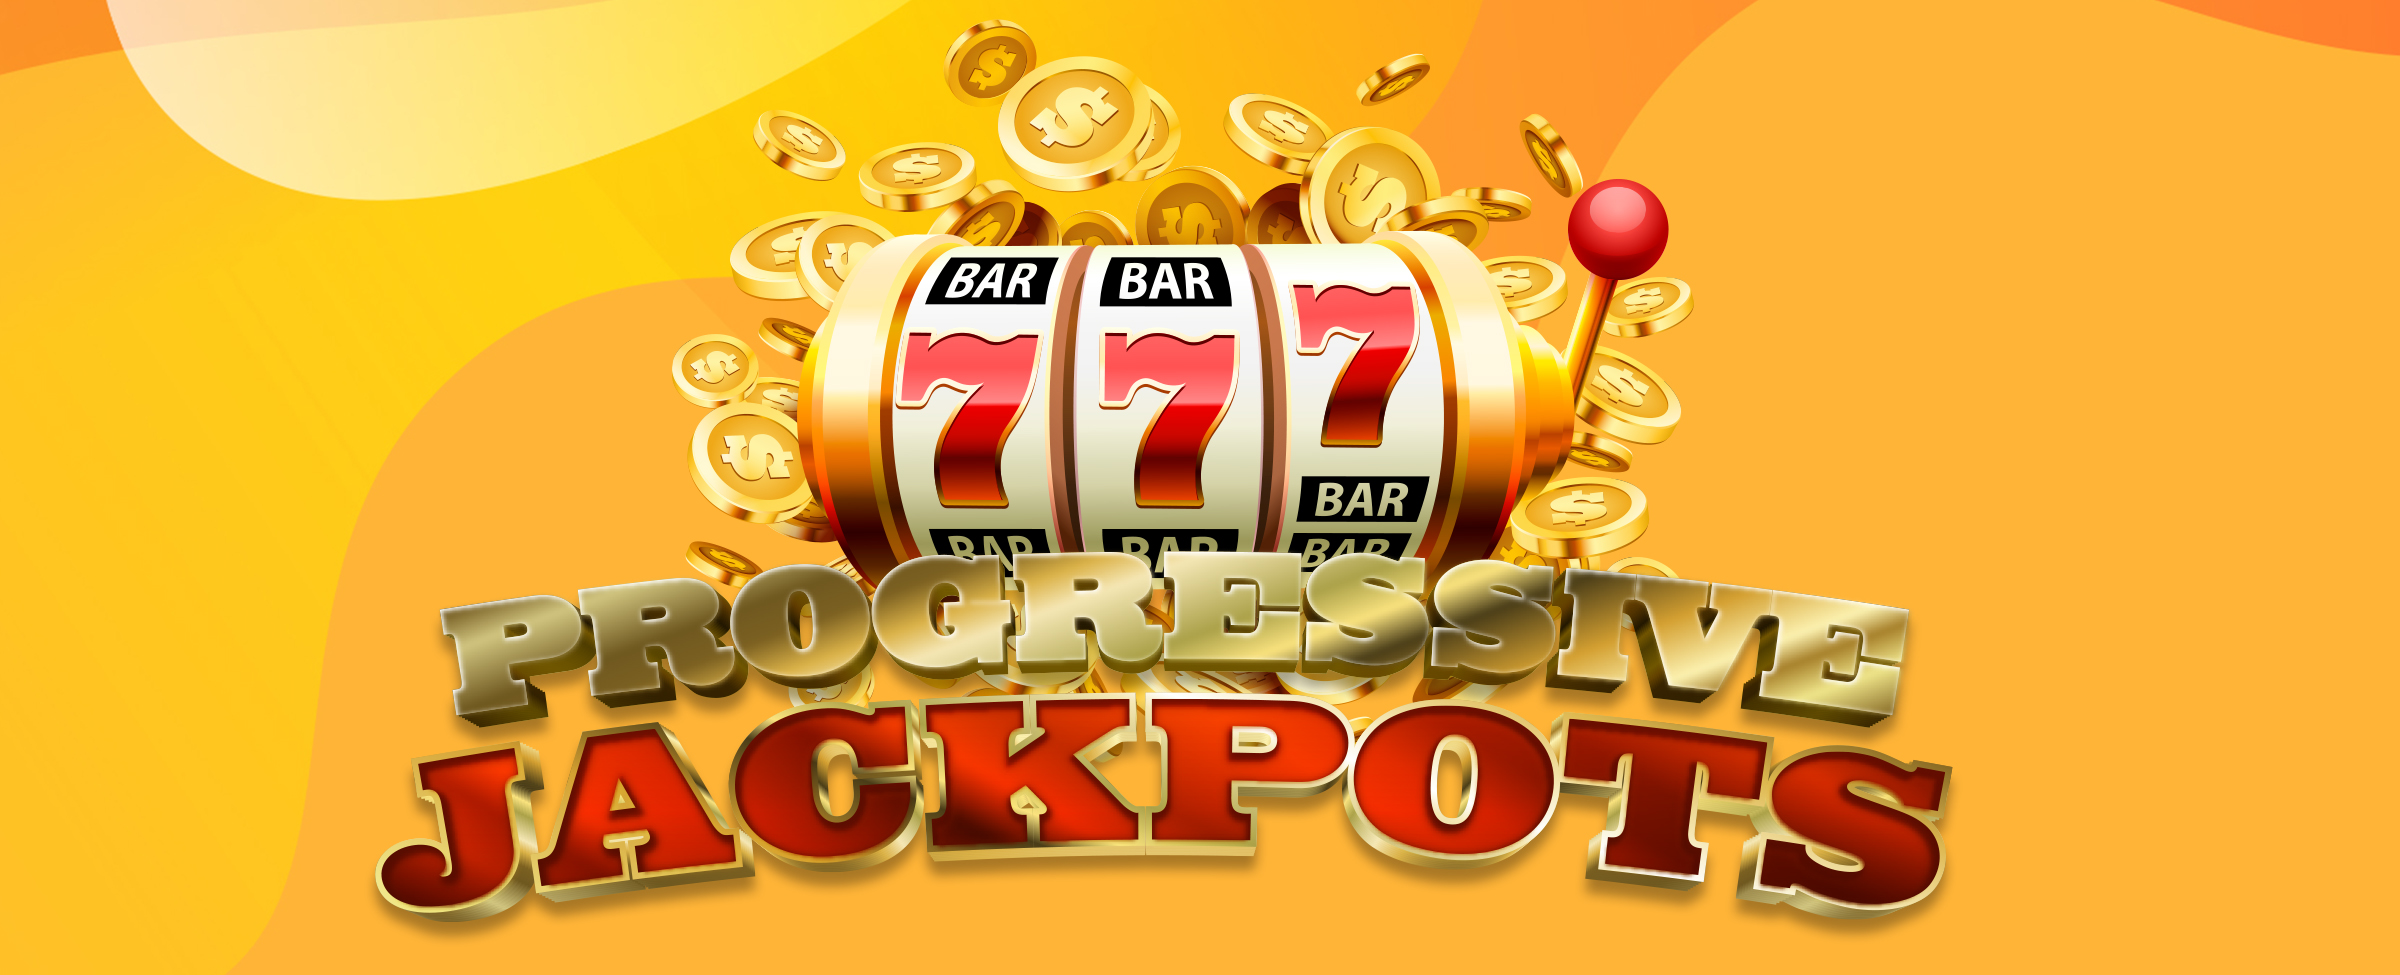 Let’s go back to basics and look at what progressive jackpots are, and how they work.